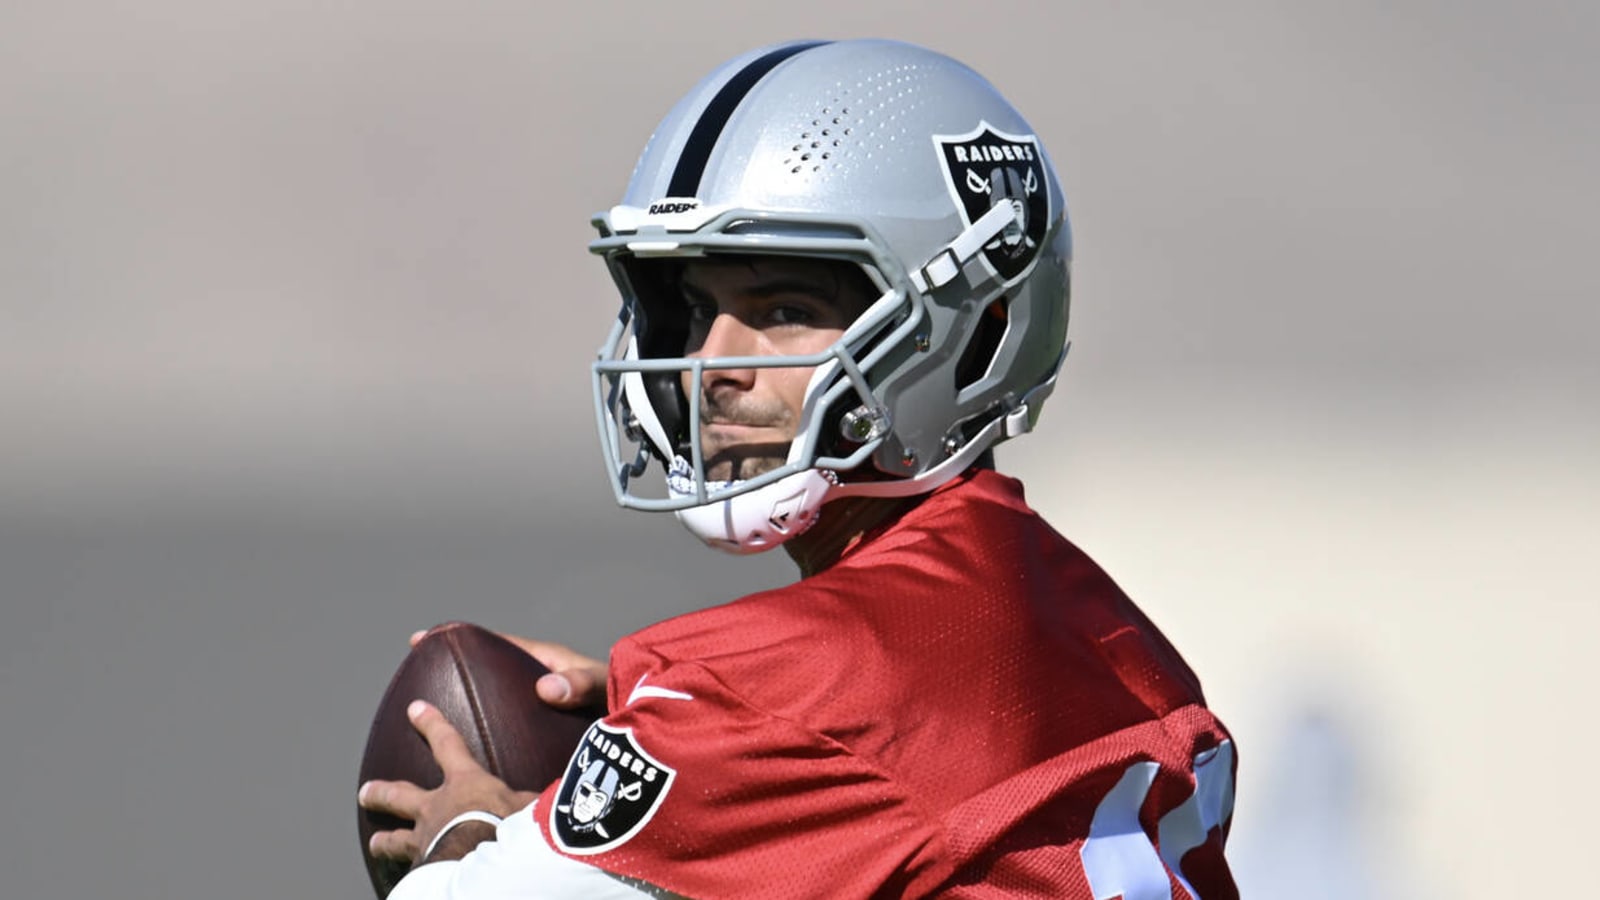 Raiders WR says Jimmy Garoppolo is 'what you want in a quarterback'